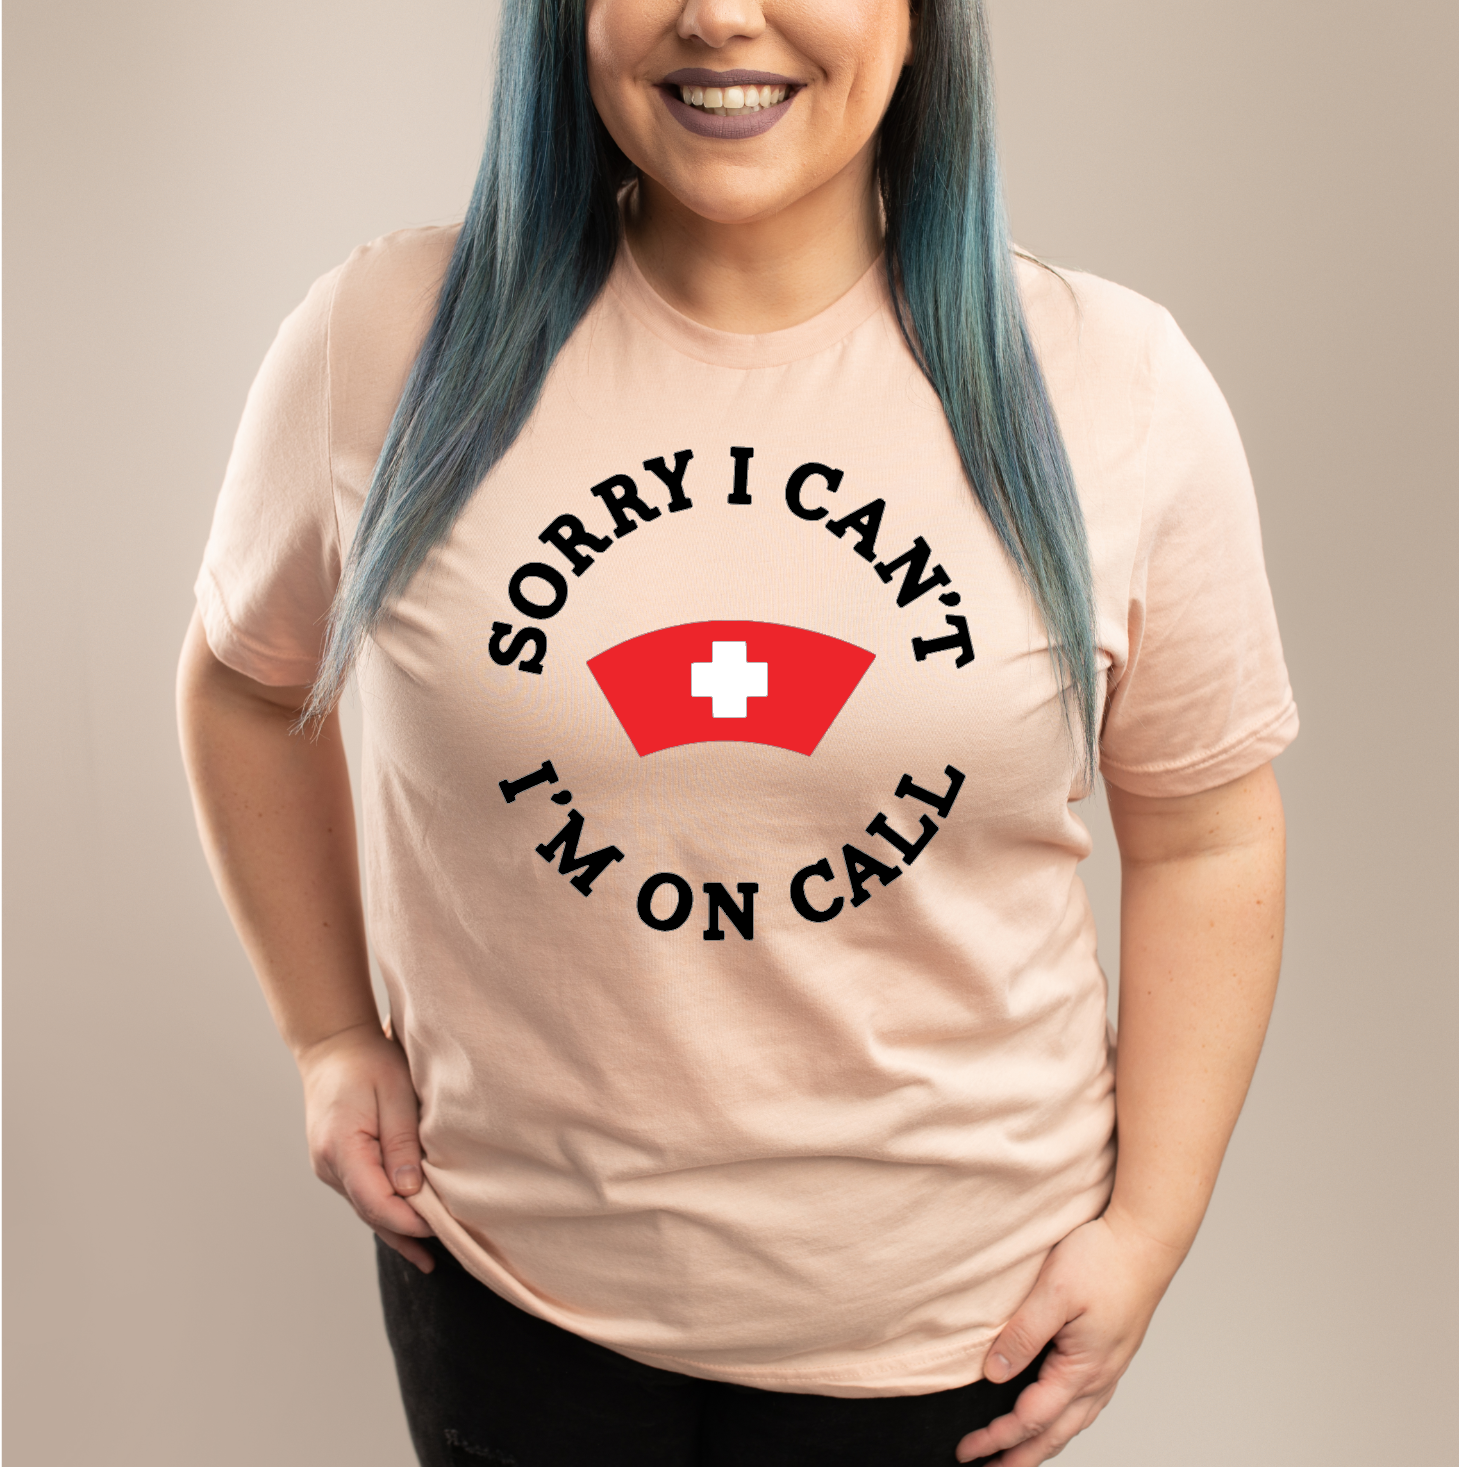 Sorry I can't, I'm on Call - Tee